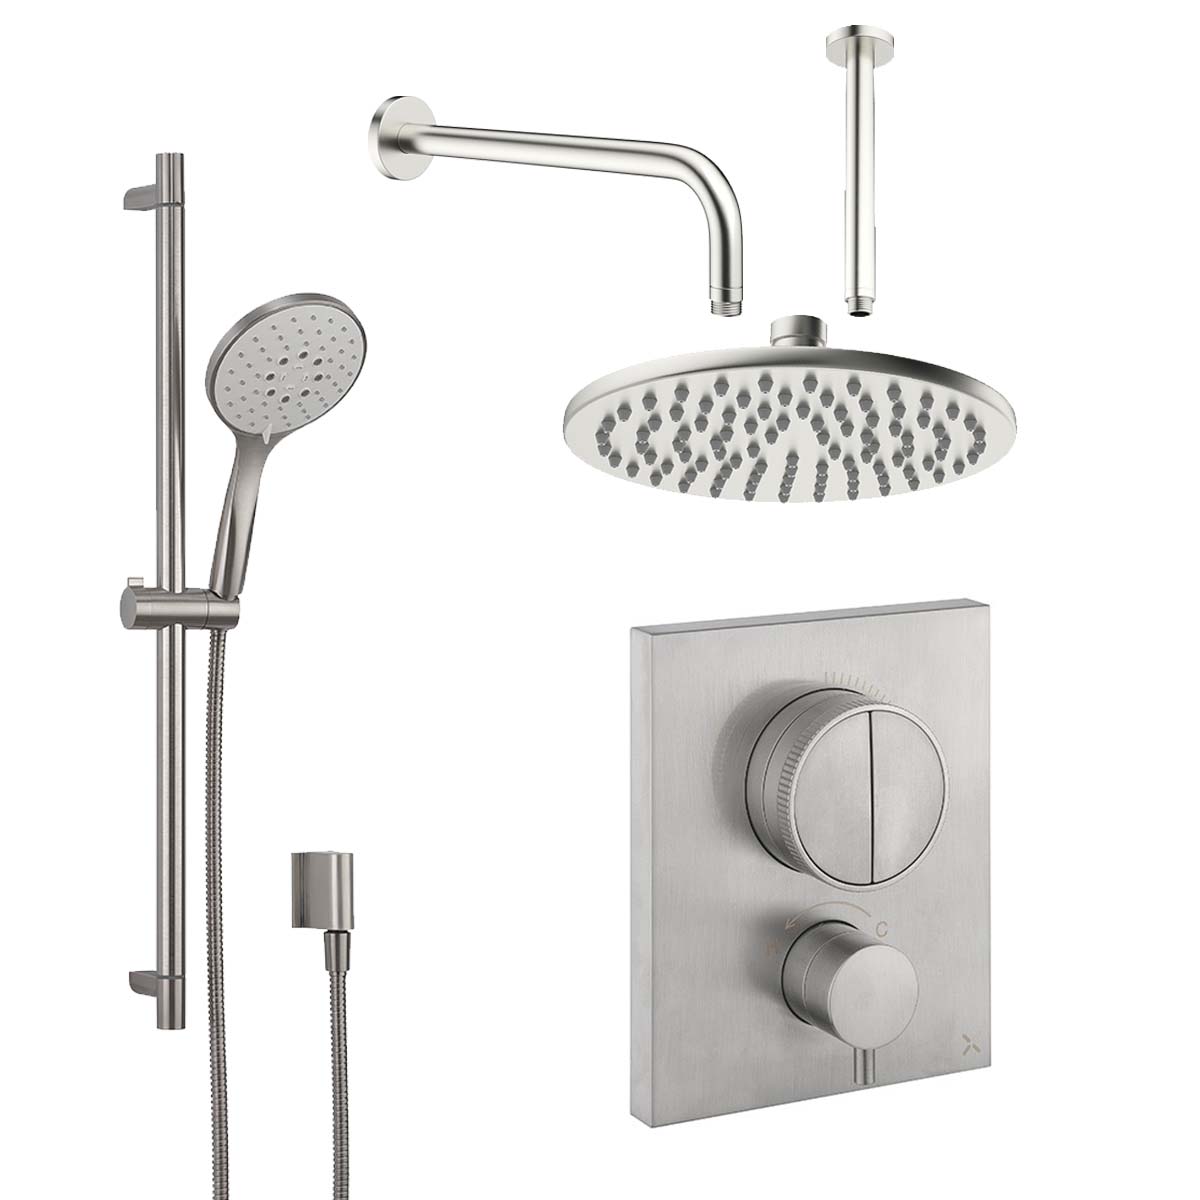 Crosswater MPRO Crossbox Push Dual Outlet Thermostatic Shower Valve With Slide Rail Handset and Fixed Overhead Brushed Stainless Steel